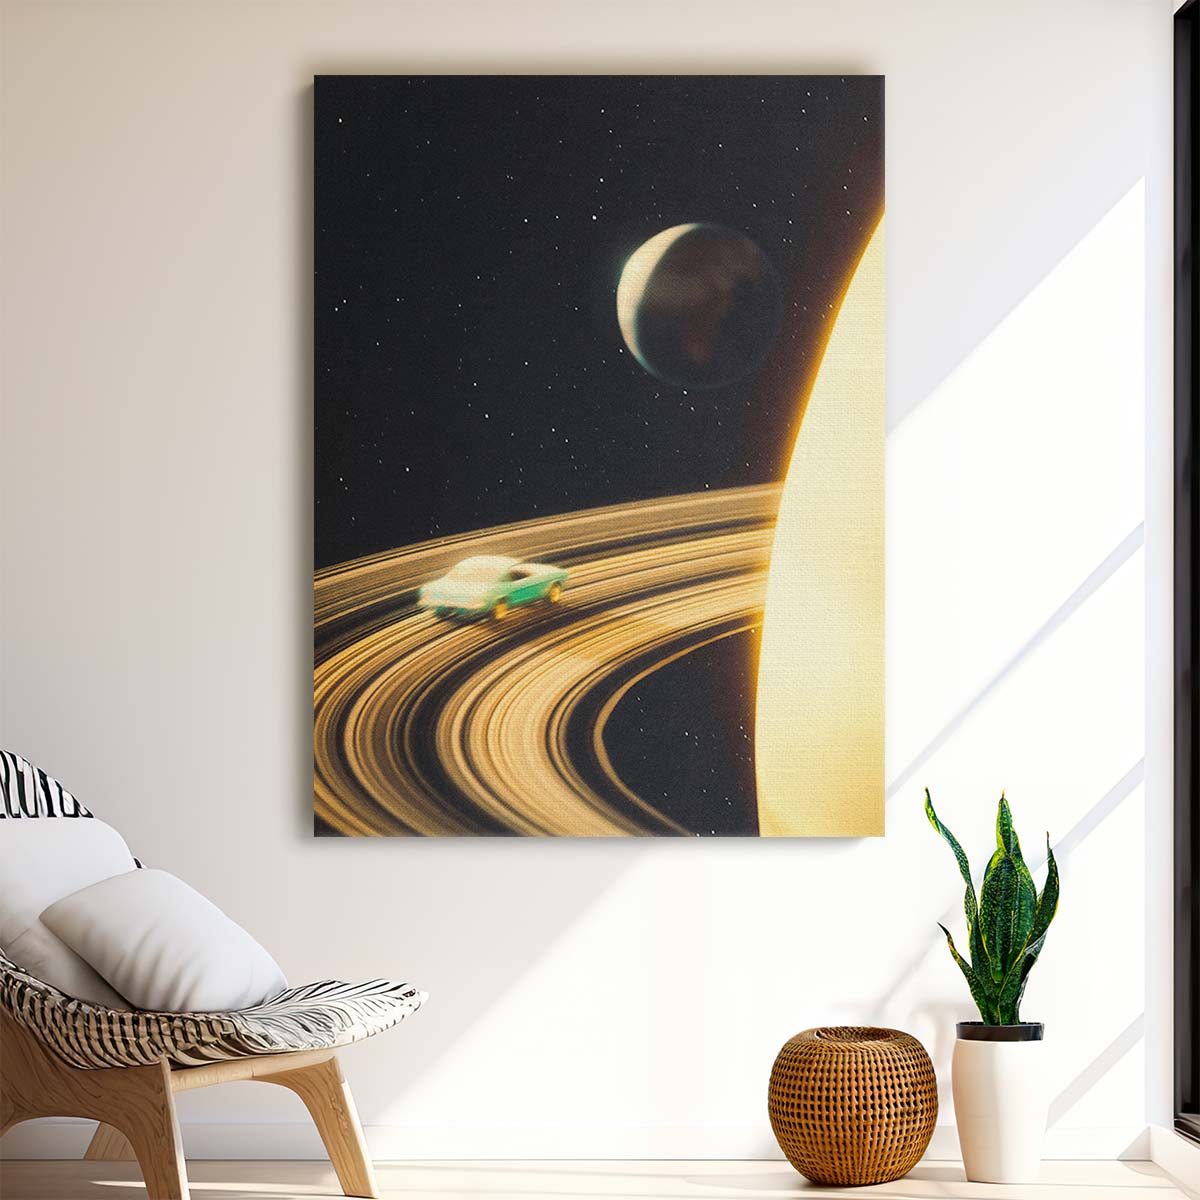 Surreal Saturn Highway Collage - Retro Futuristic Space Travel Art by Luxuriance Designs, made in USA